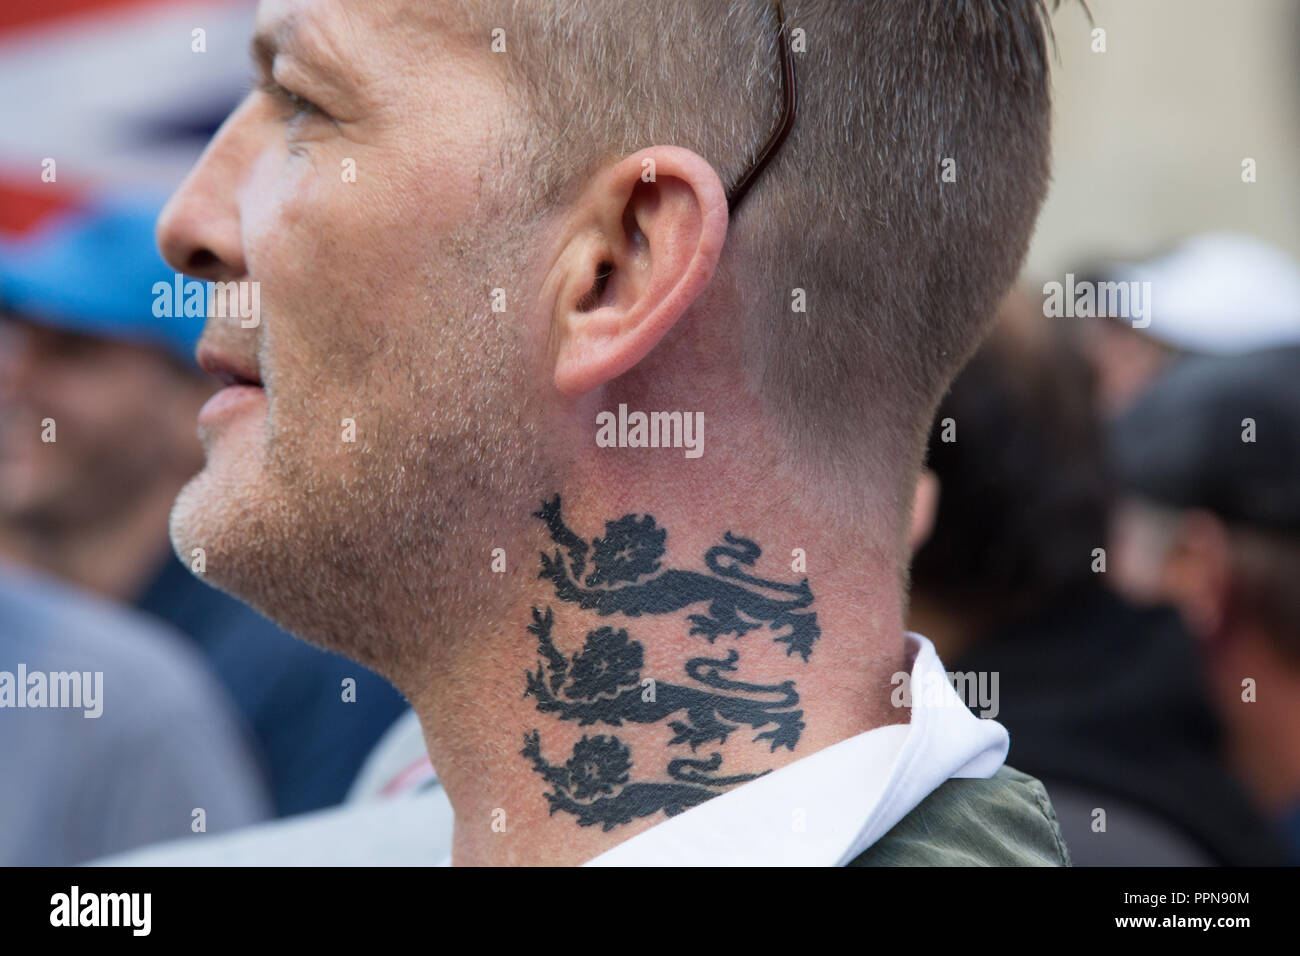 London, UK. 27th Sep, 2018. Tommy Robinson supporters cheer the far-right activist outside court. Credit: Thabo Jaiyesimi/Alamy Live News Stock Photo